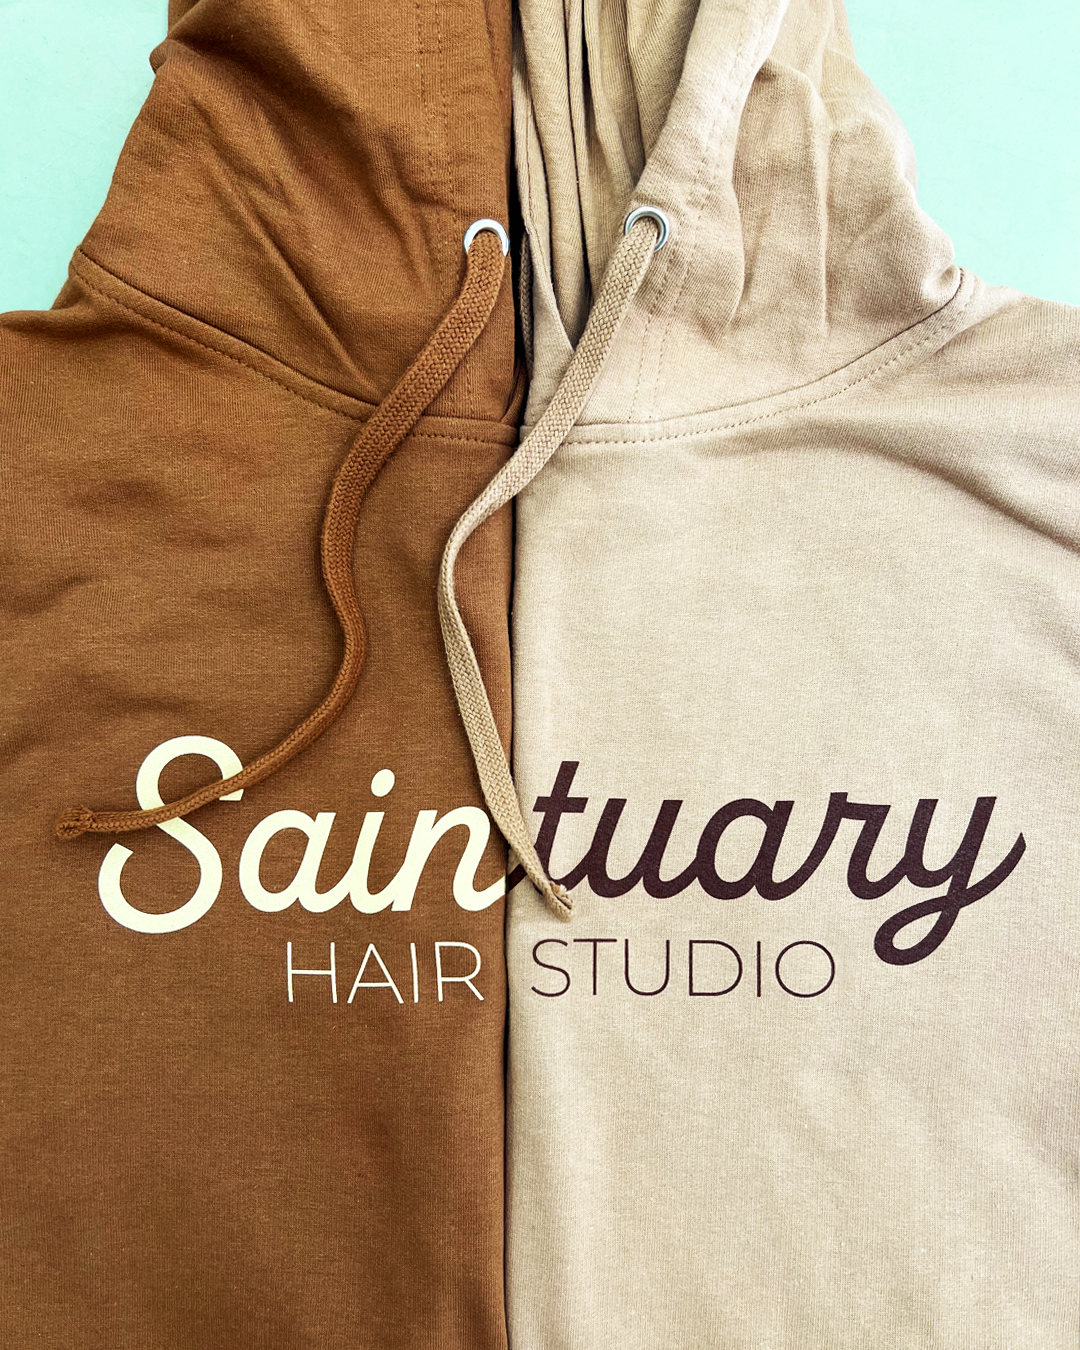 logo design on independent trading company hoodies